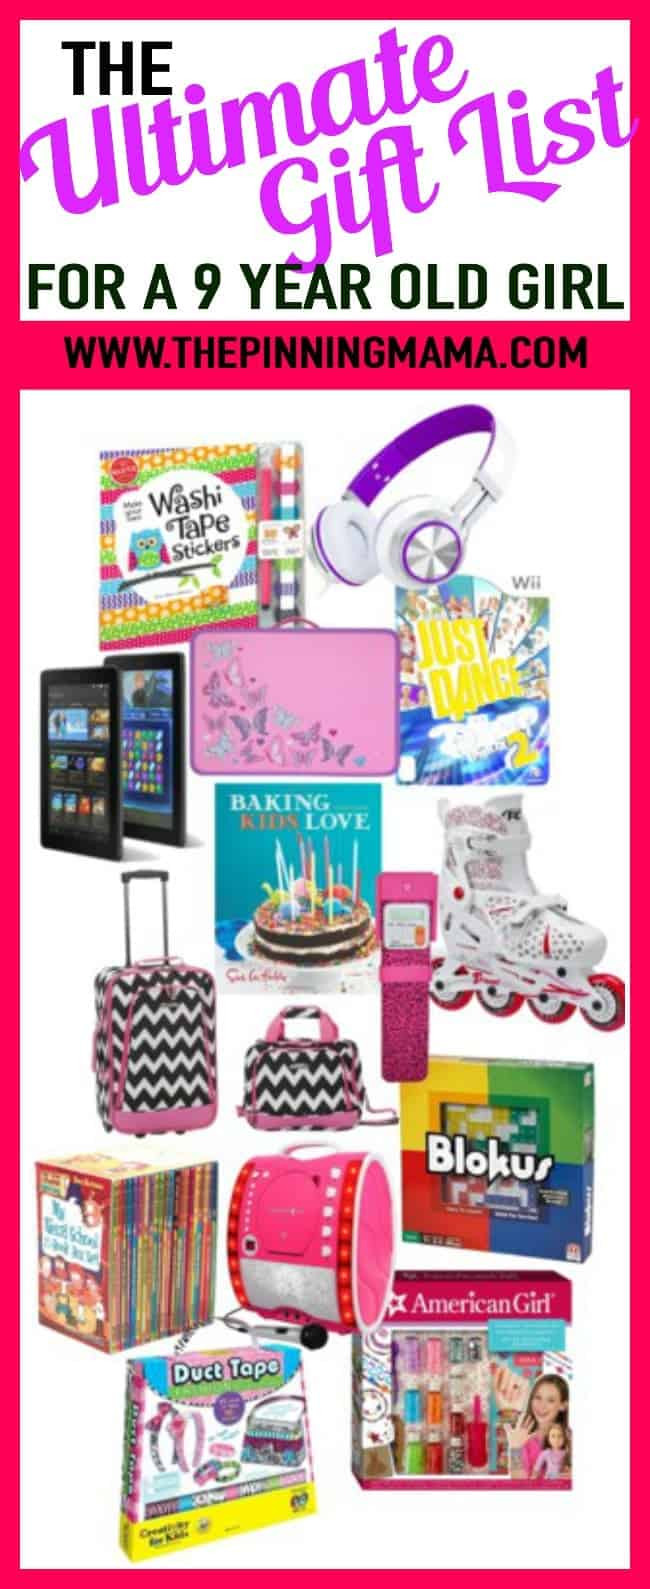 Birthday Gift Ideas For 9 Year Old Girl
 The Ultimate Gift List for a 9 Year Old Girl • The Pinning